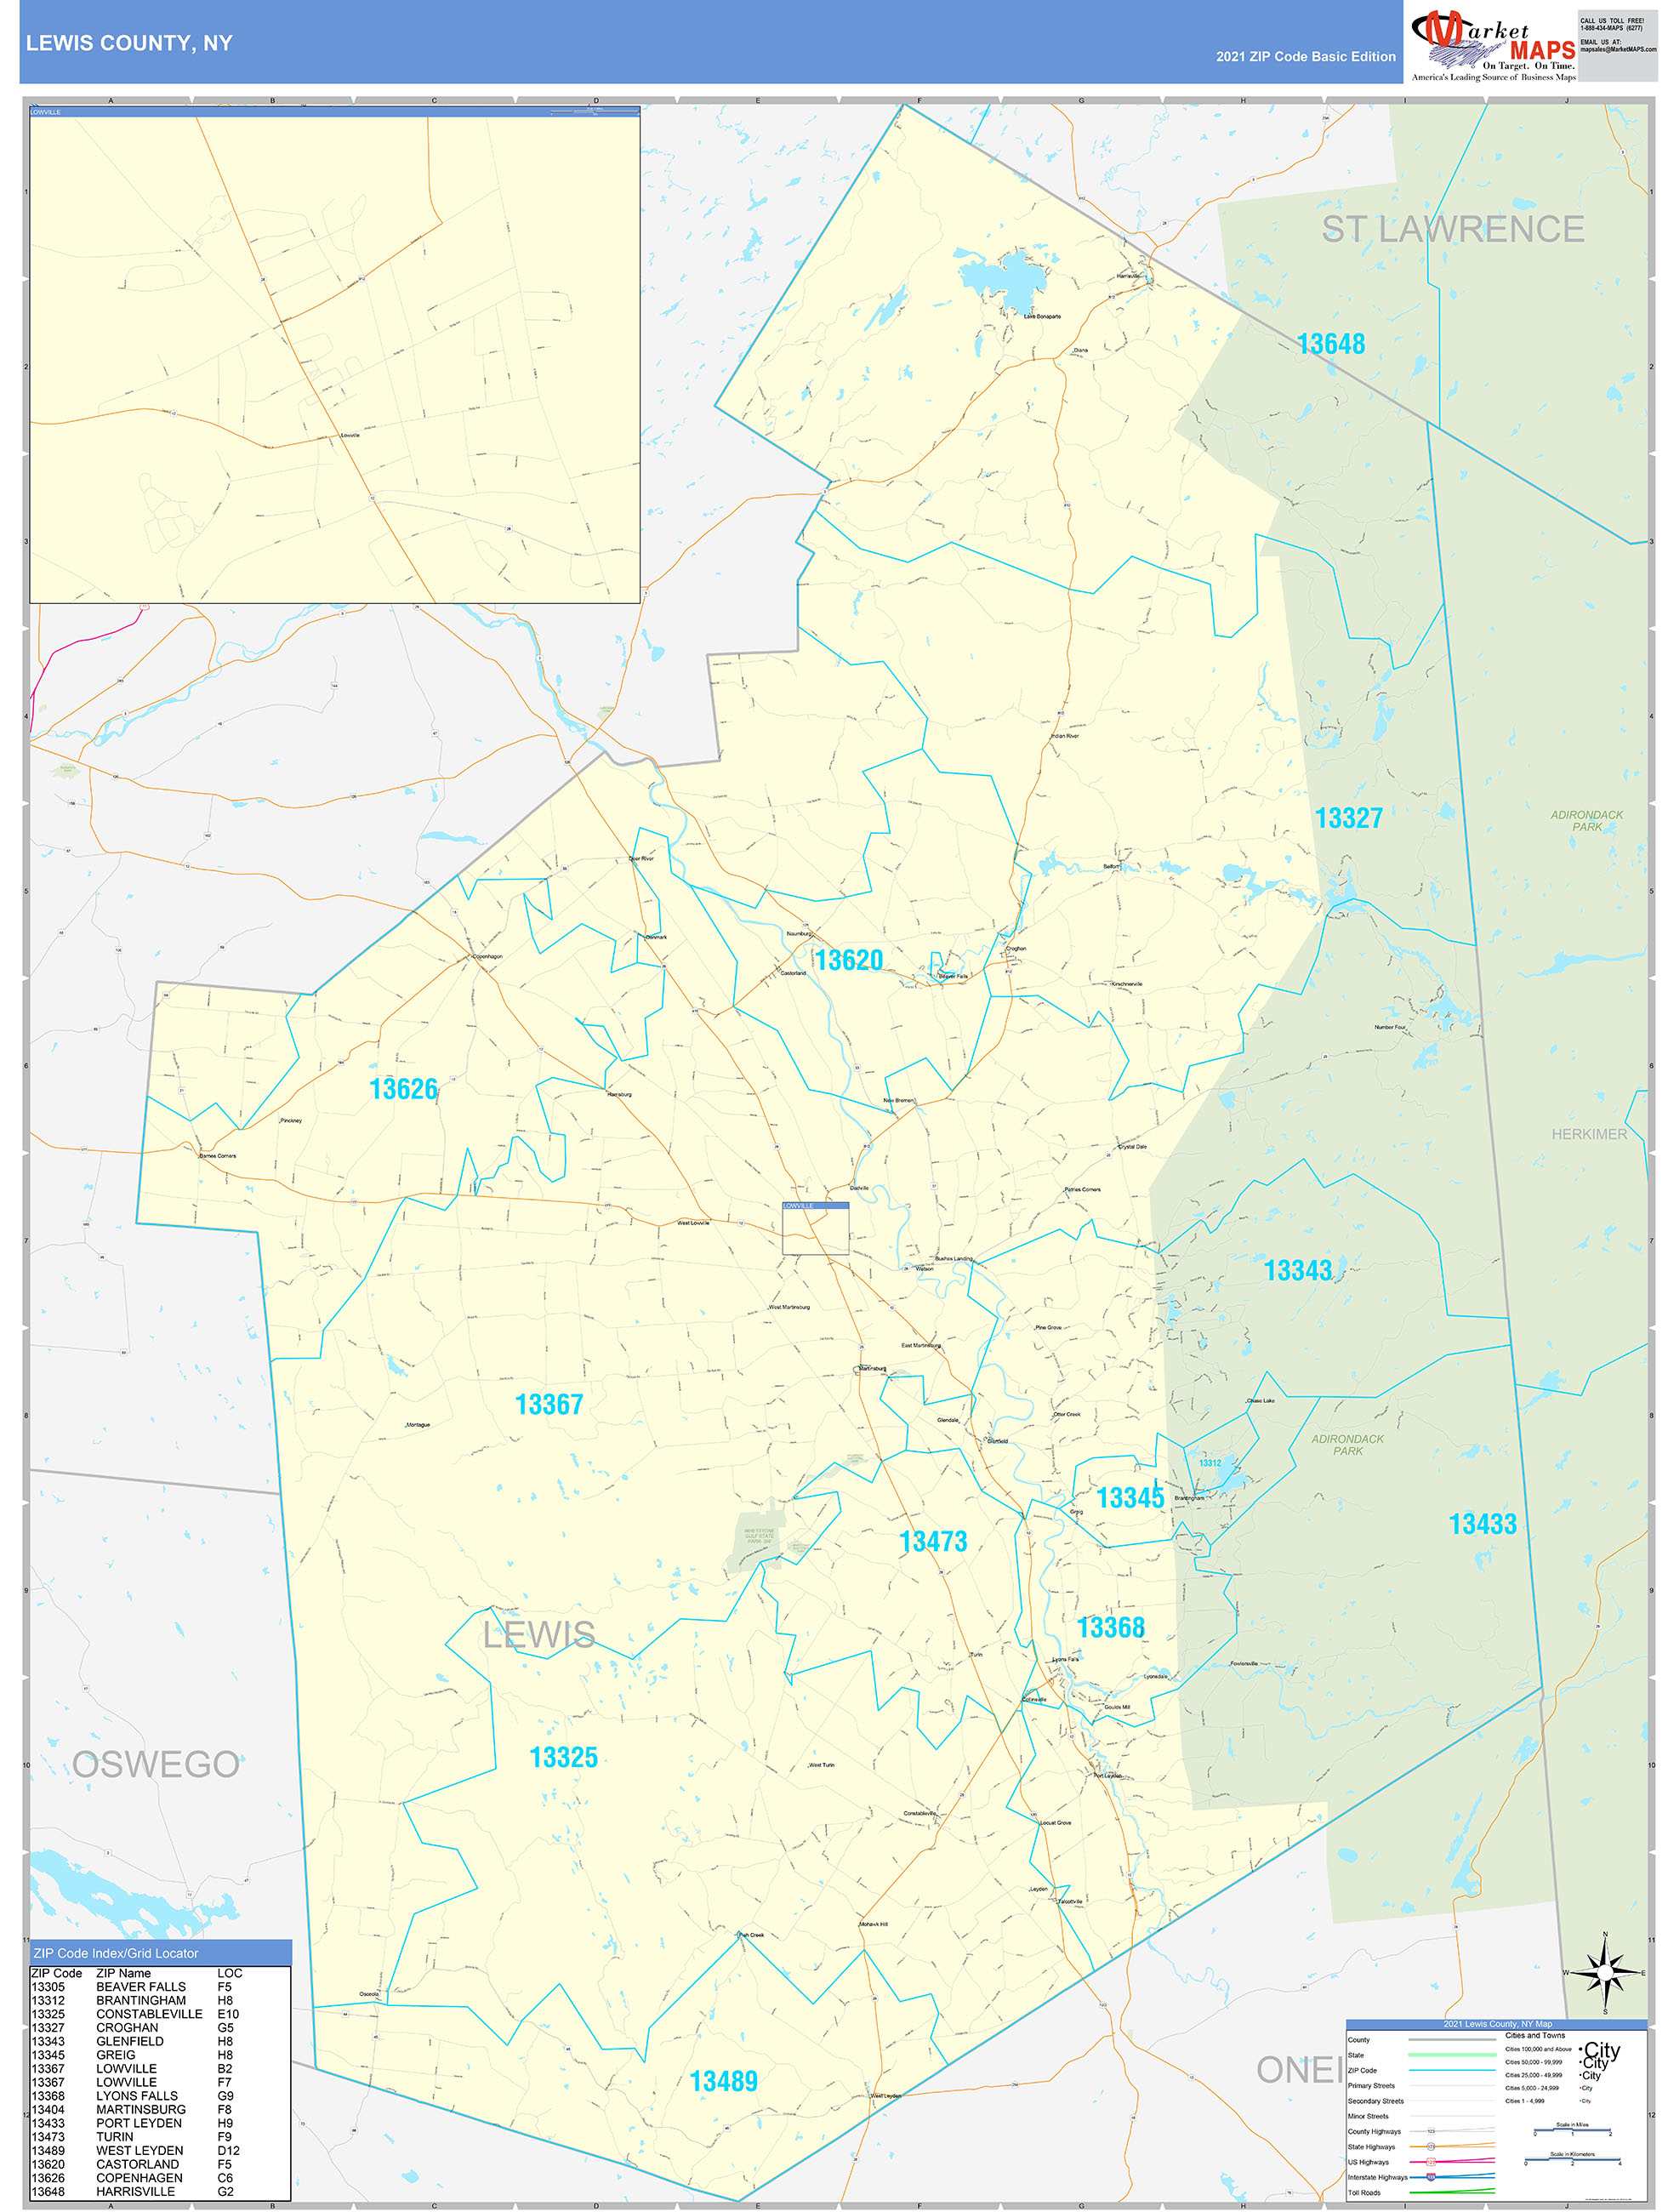 Lewis County, NY Zip Code Wall Map Basic Style by MarketMAPS MapSales